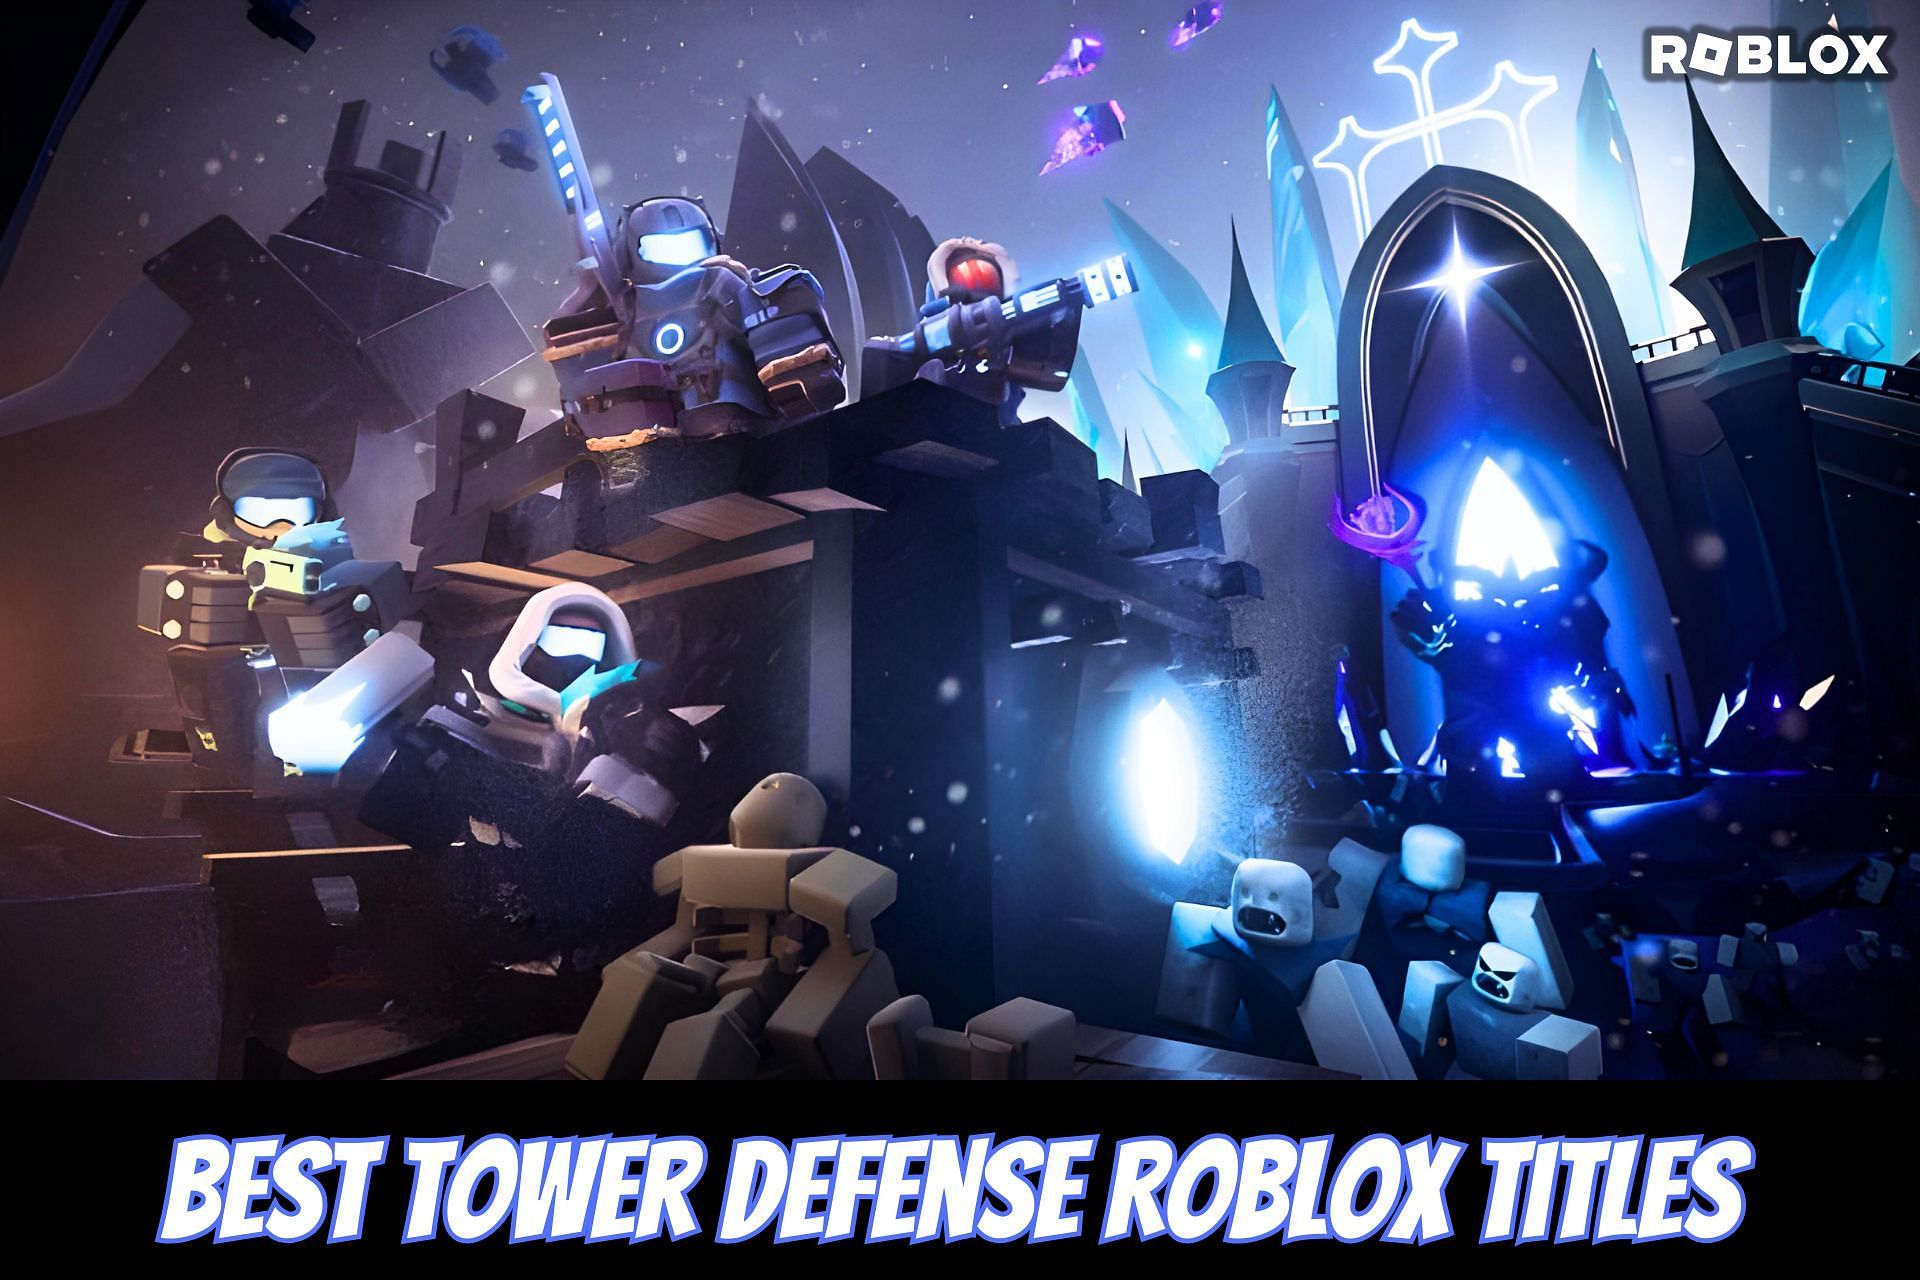 Defend your tower! (Image via Roblox)